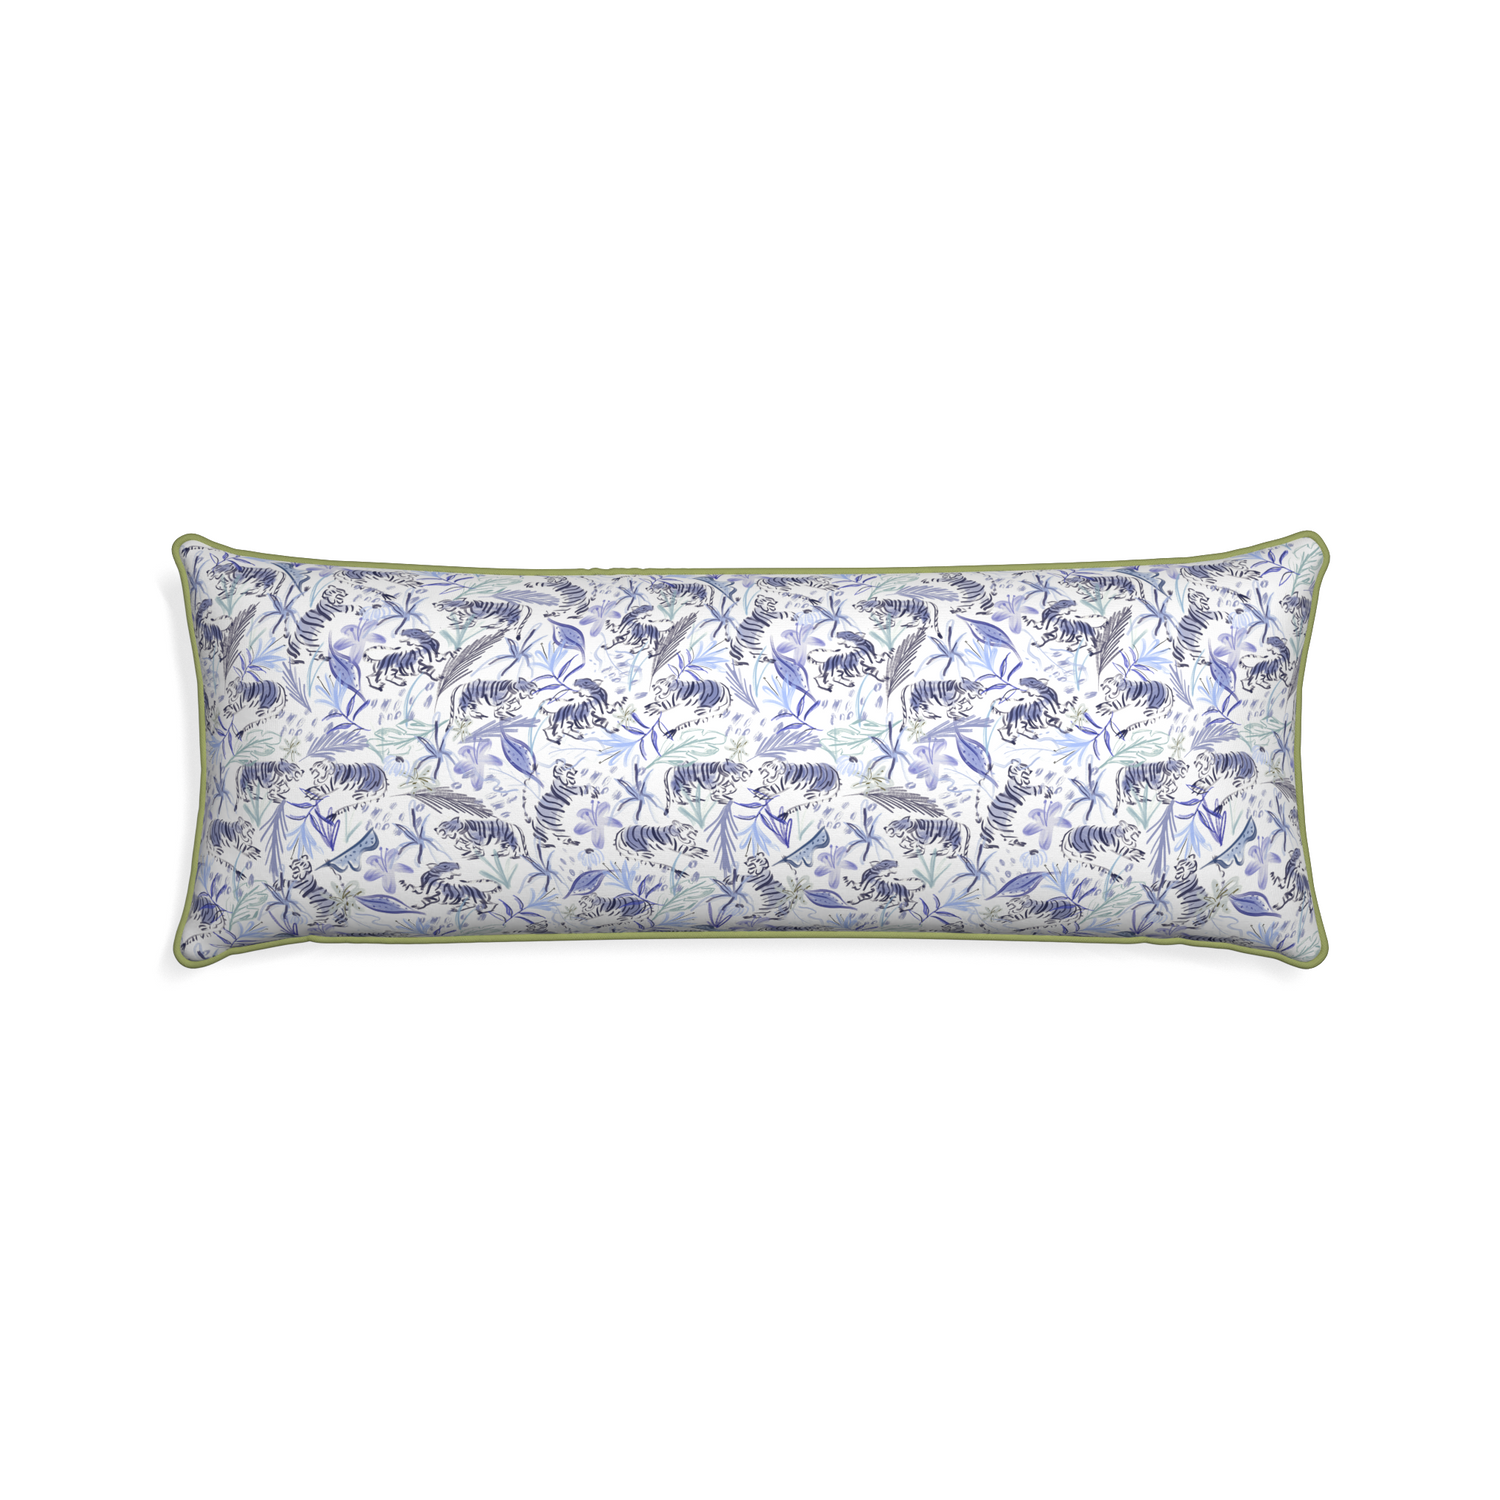 Xl-lumbar frida blue custom blue with intricate tiger designpillow with moss piping on white background